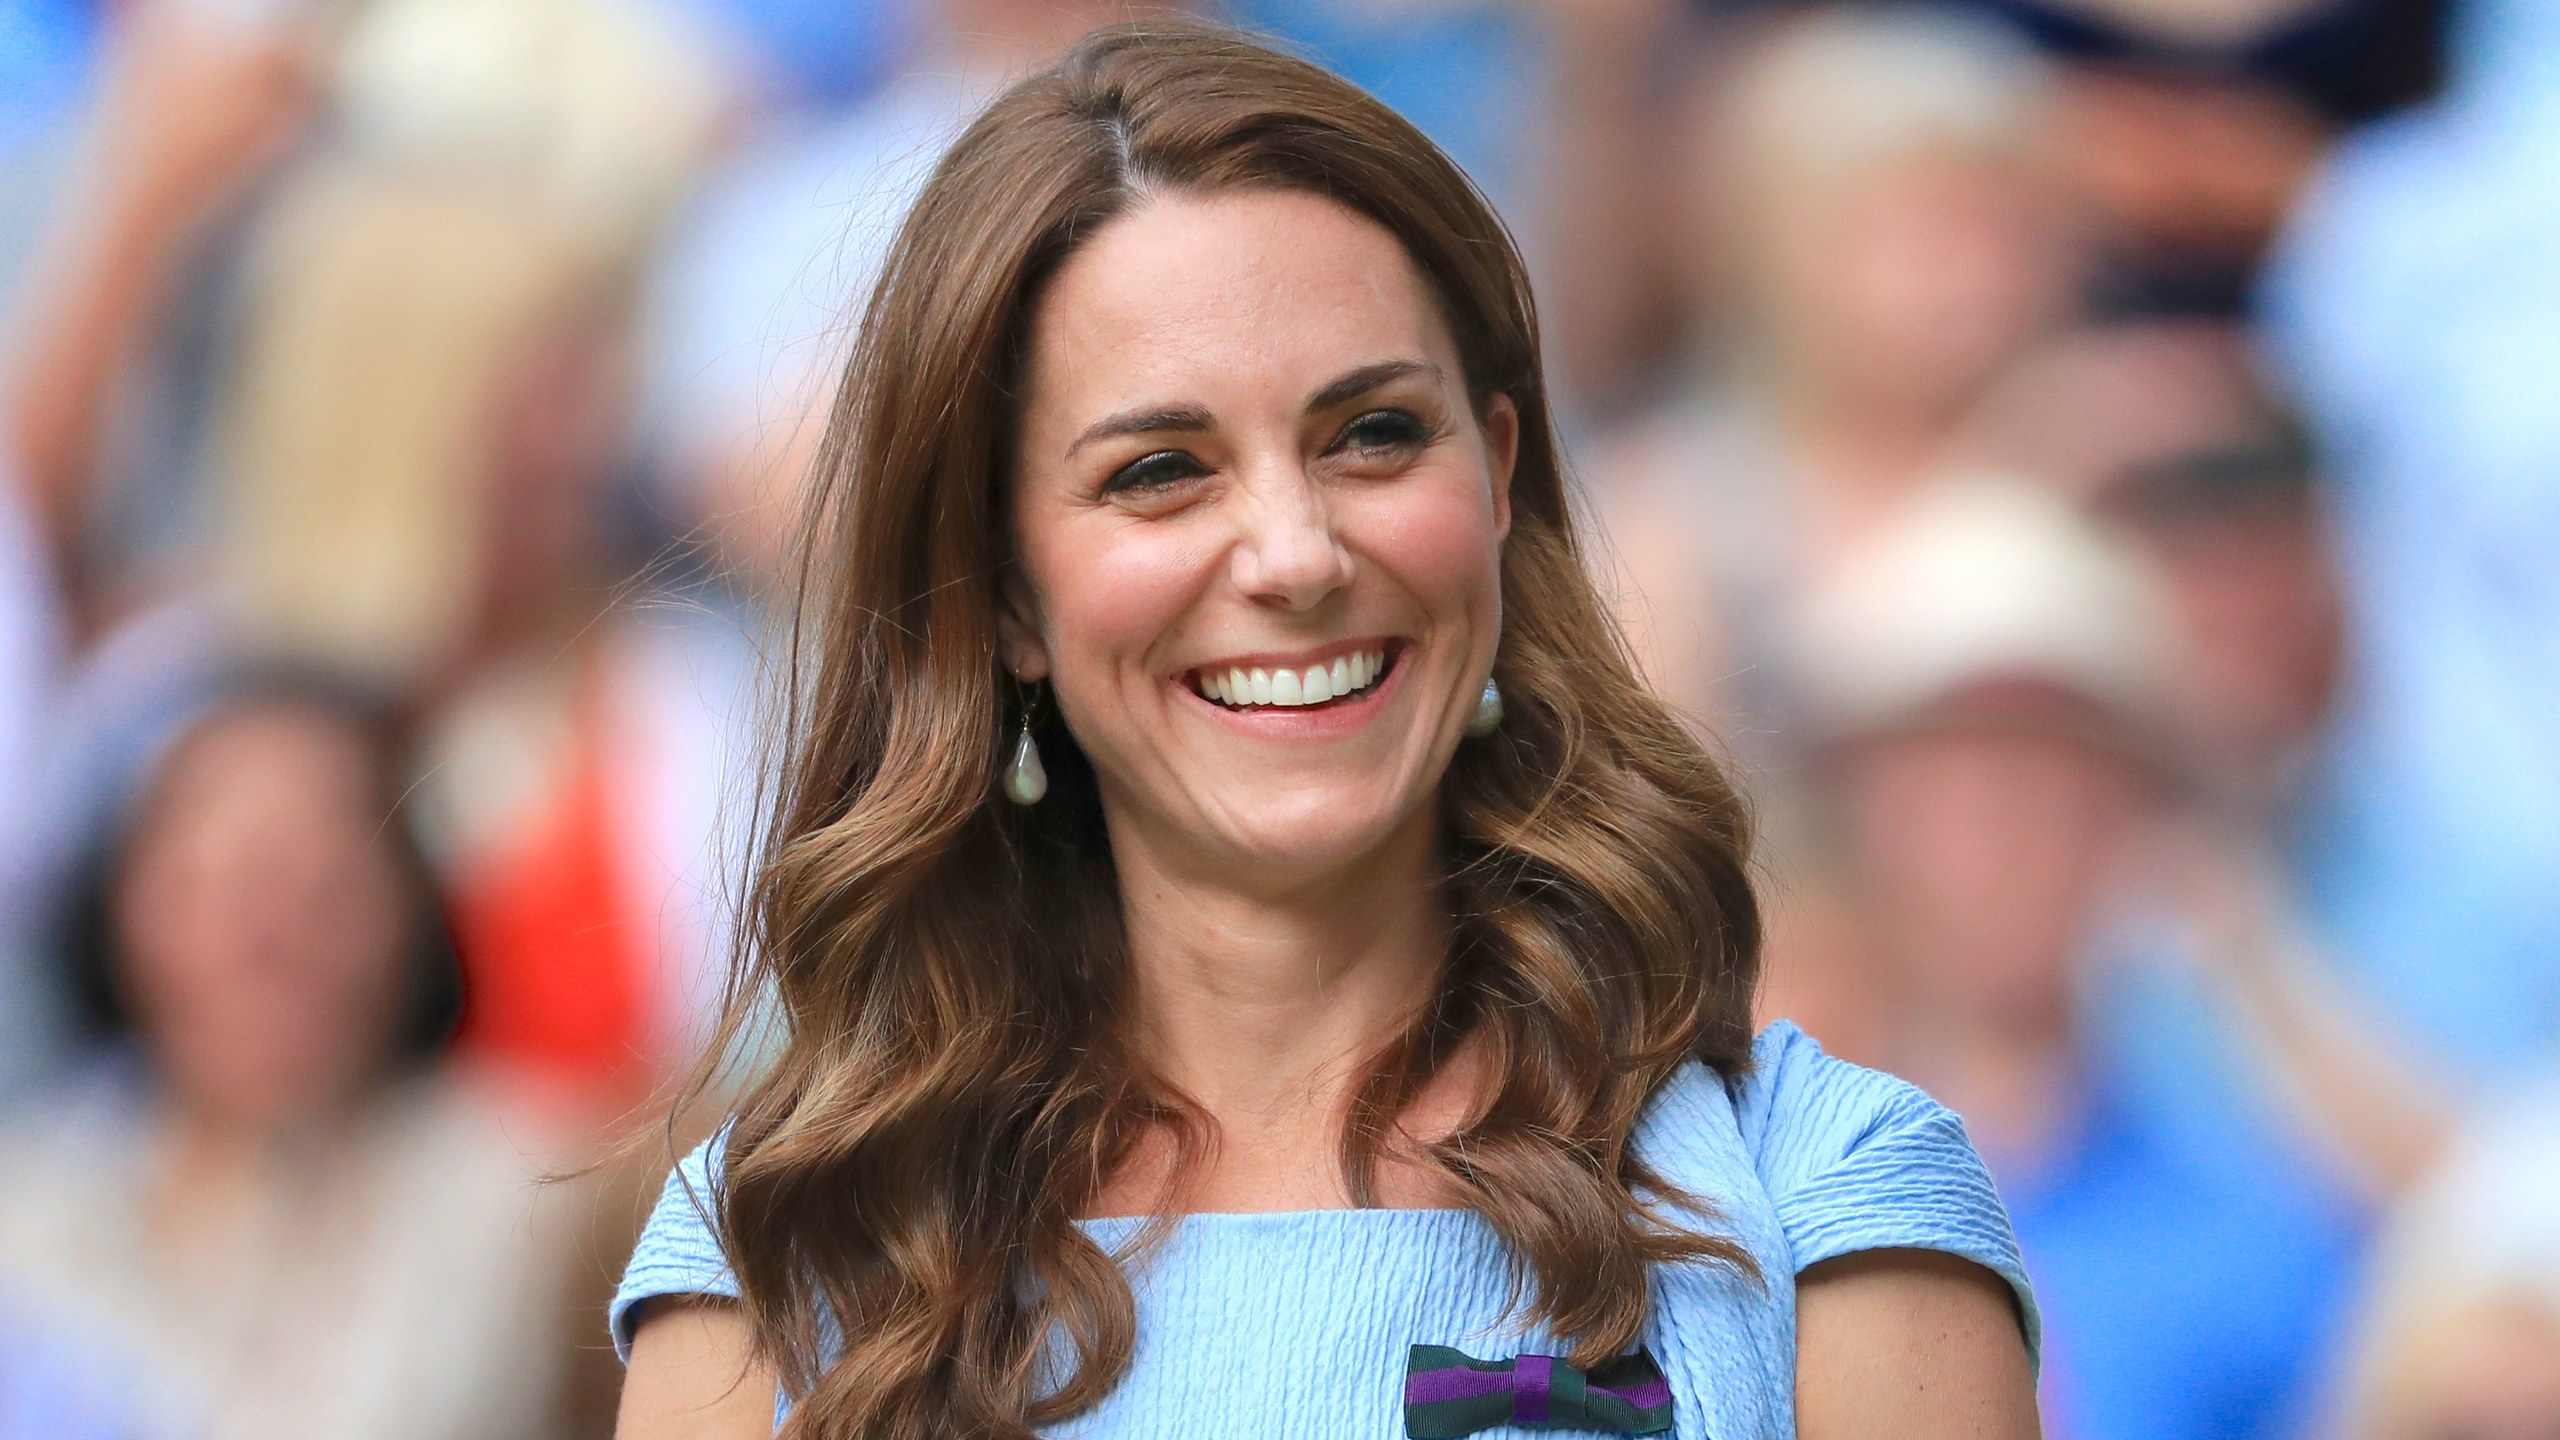 Catherine Middleton, Michelle Anderson, Royal wallpapers, High quality, 2560x1440 HD Desktop